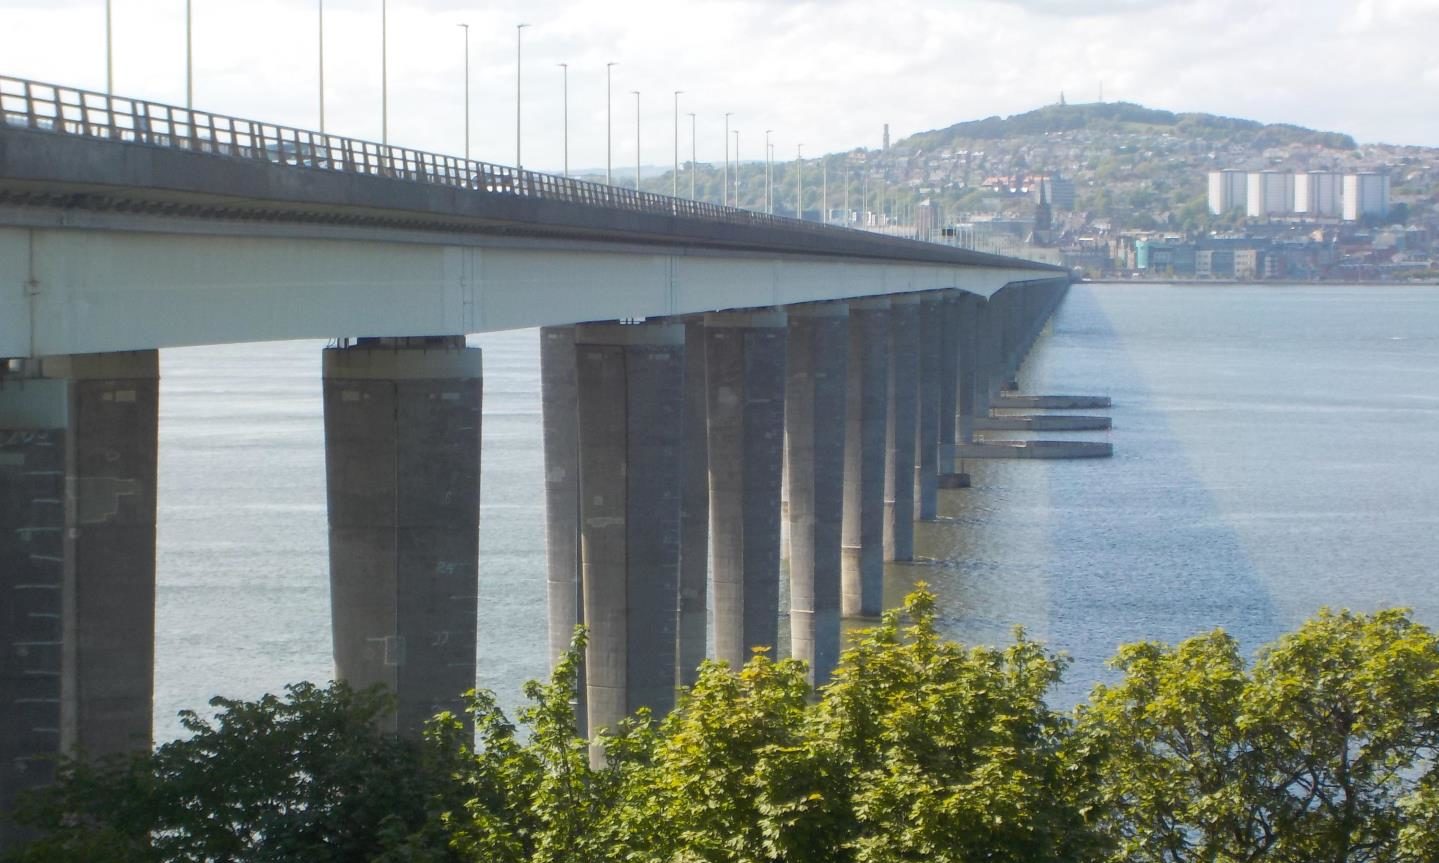 Tay Road Bridge To Close For More Than Three Hours On Friday To Repair